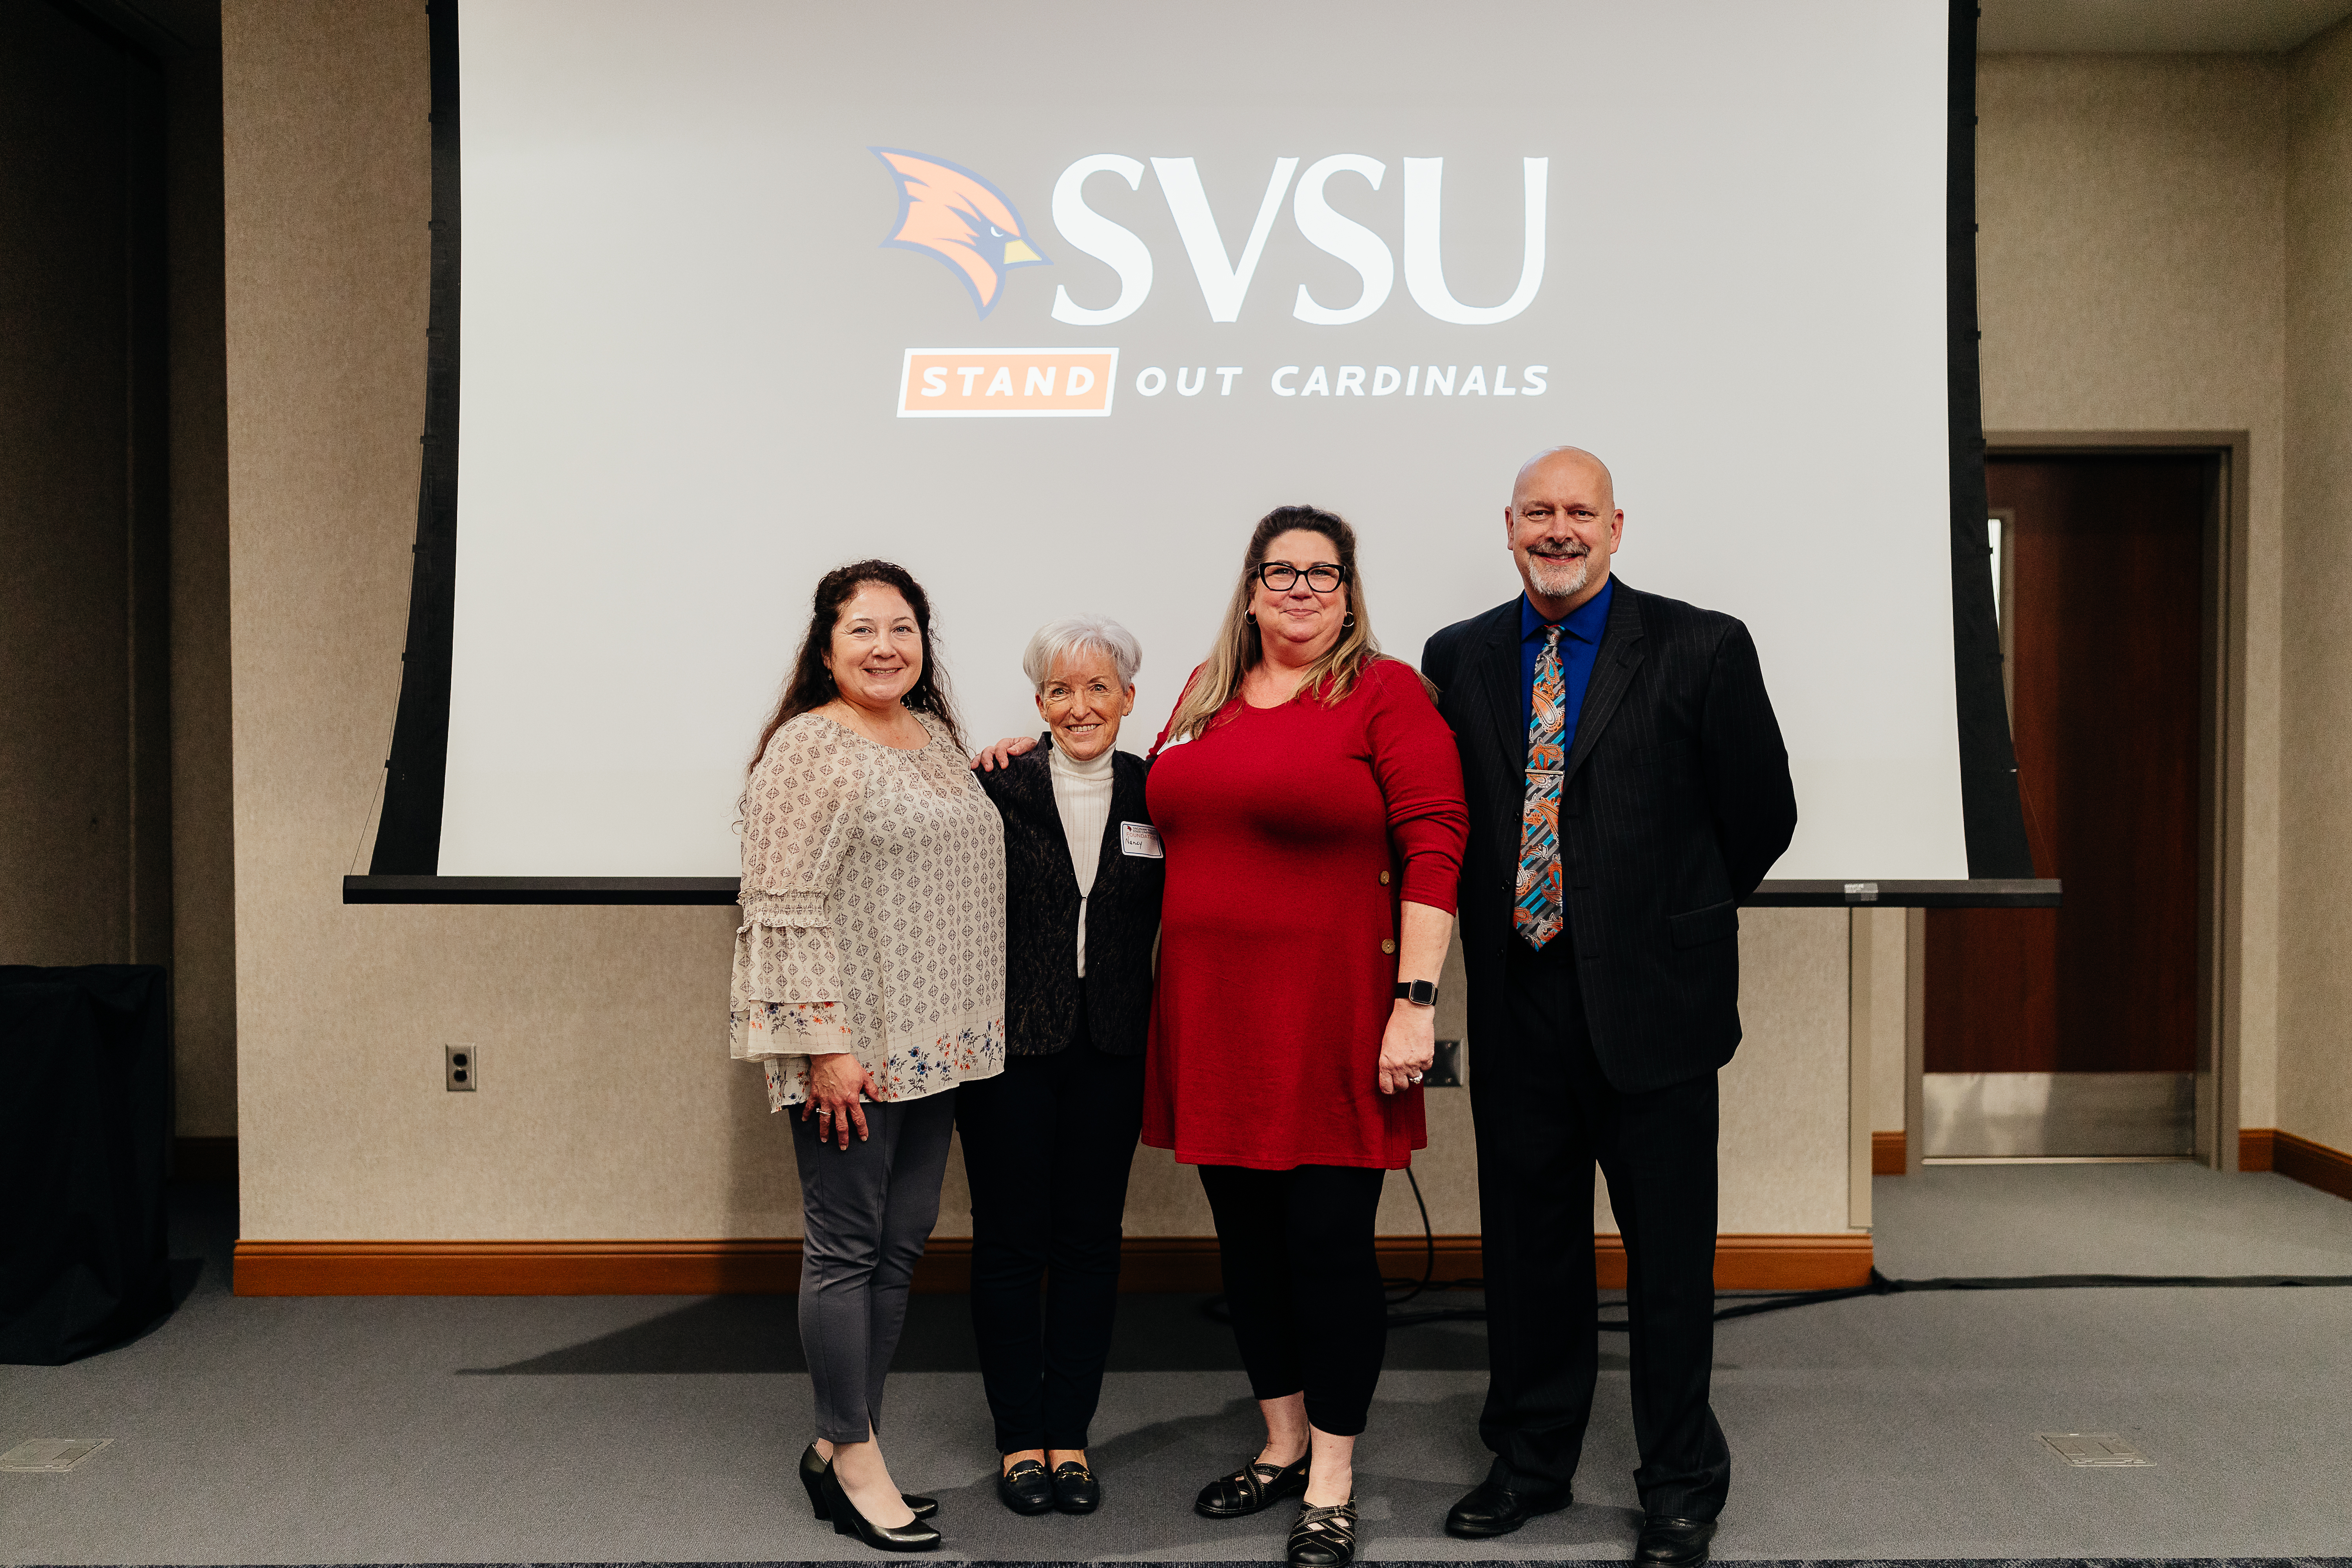 Pictured at a ceremony honoring the Wageners (left to right): SSA President Kathleen Chantaca‑Kubczak, former MEA Vice President Nancy Strachan, SSA Vice President Deb Rickert, MEA Vice President Brett Smith.